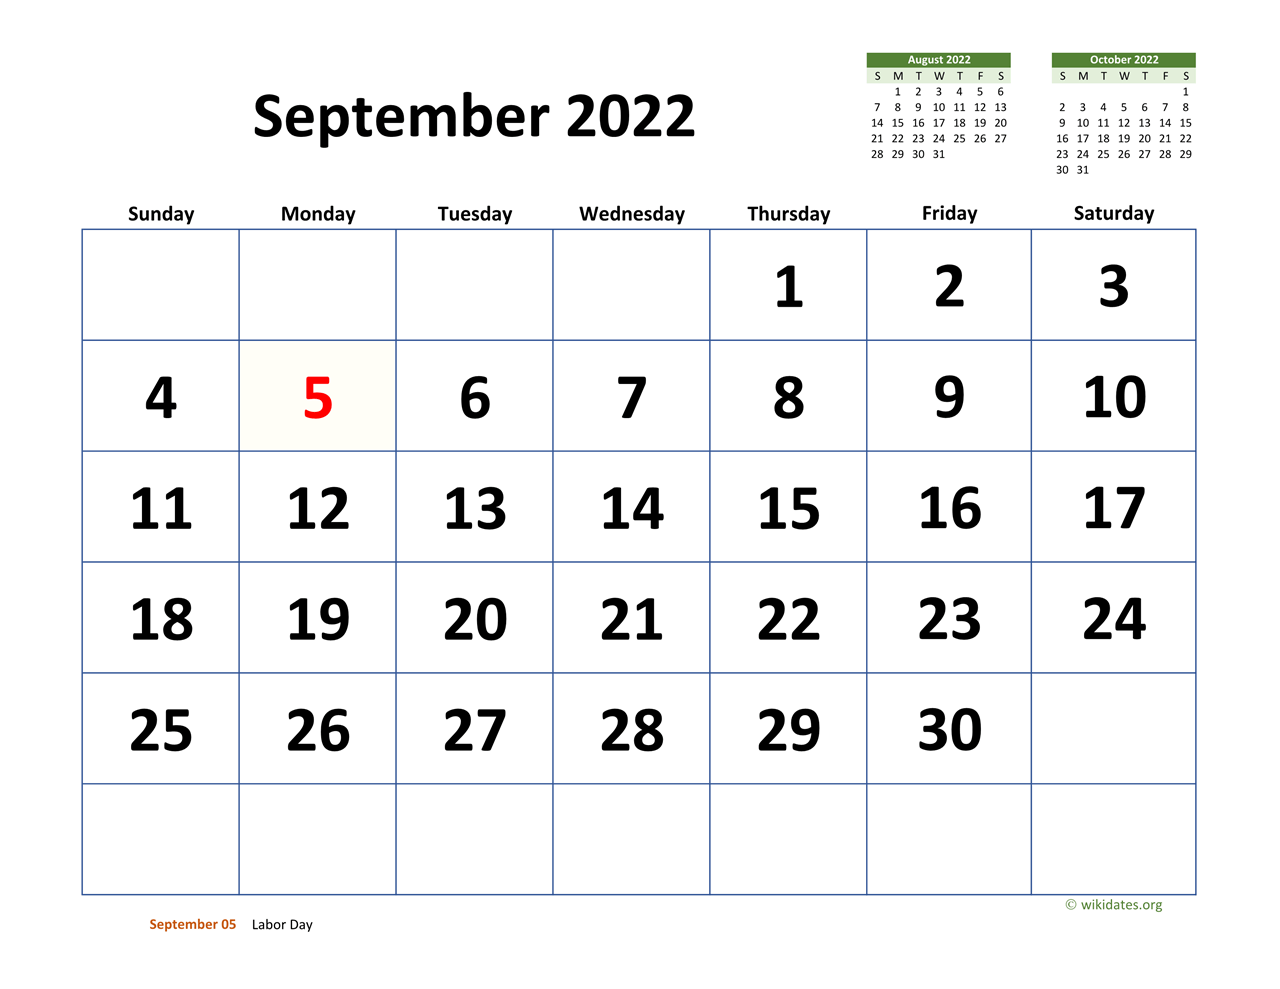 September 2022 Calendar With Extra-Large Dates | Wikidates.org